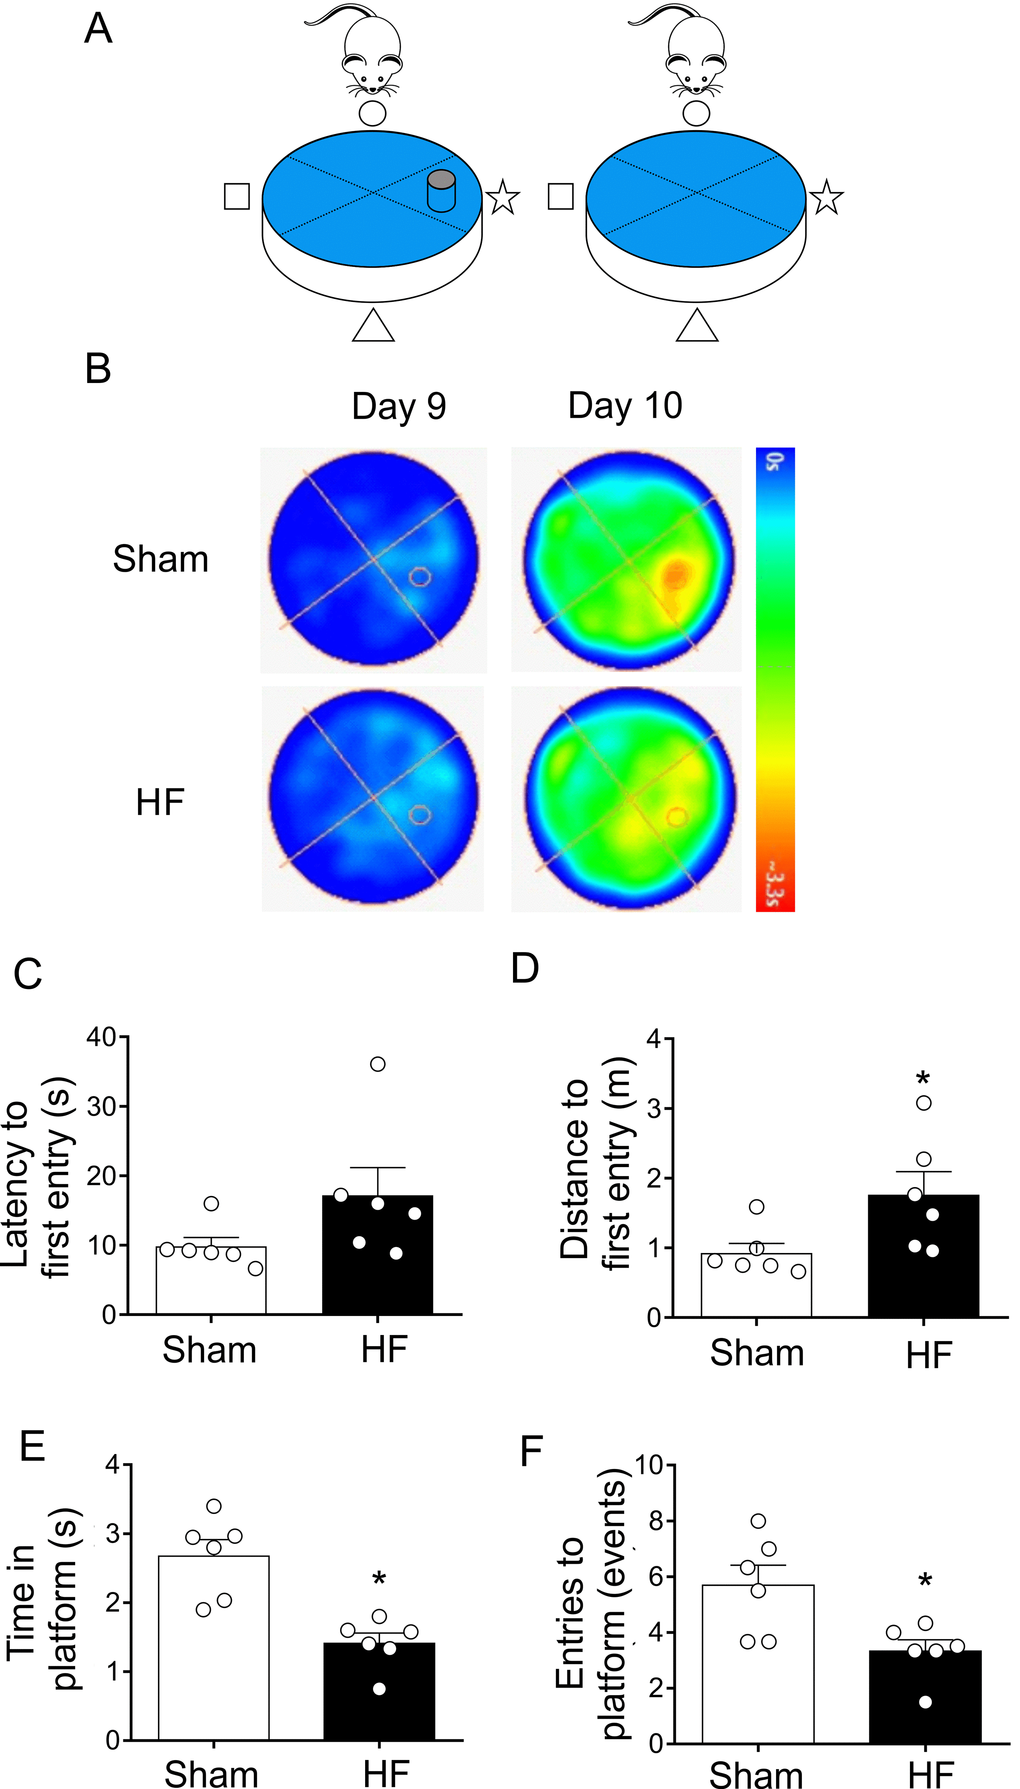 Heart failure (HF) rats showed consolidation memory decline. (A) Representative cartoon showing the rat and platform position in the pool. (B) Representative trajectory heat maps obtained from one Sham rat and one HF rat during Water Maze test during day 9 and 10. Contrary to day 9, in day 10 the platform was removed. Pseudocolor intensity indicate the time latency that the rat remained swimming and searching for the platform. Contrarily to Sham rats, HF animals showed less persistence in the place where the platform was originally located. (C) Summary data showing latency to first entry to the place where the platform was located (day 9). (D) Summary data showing the distance for first entry to the place where the platform was located (day 9). HF rats travelled more distance to first entry compared to Sham animals. (E, F) HF rats display a significant decrease in the time and entries to the place where the platform was located (compared to day 9). Values are means ± S.E.M. *, p